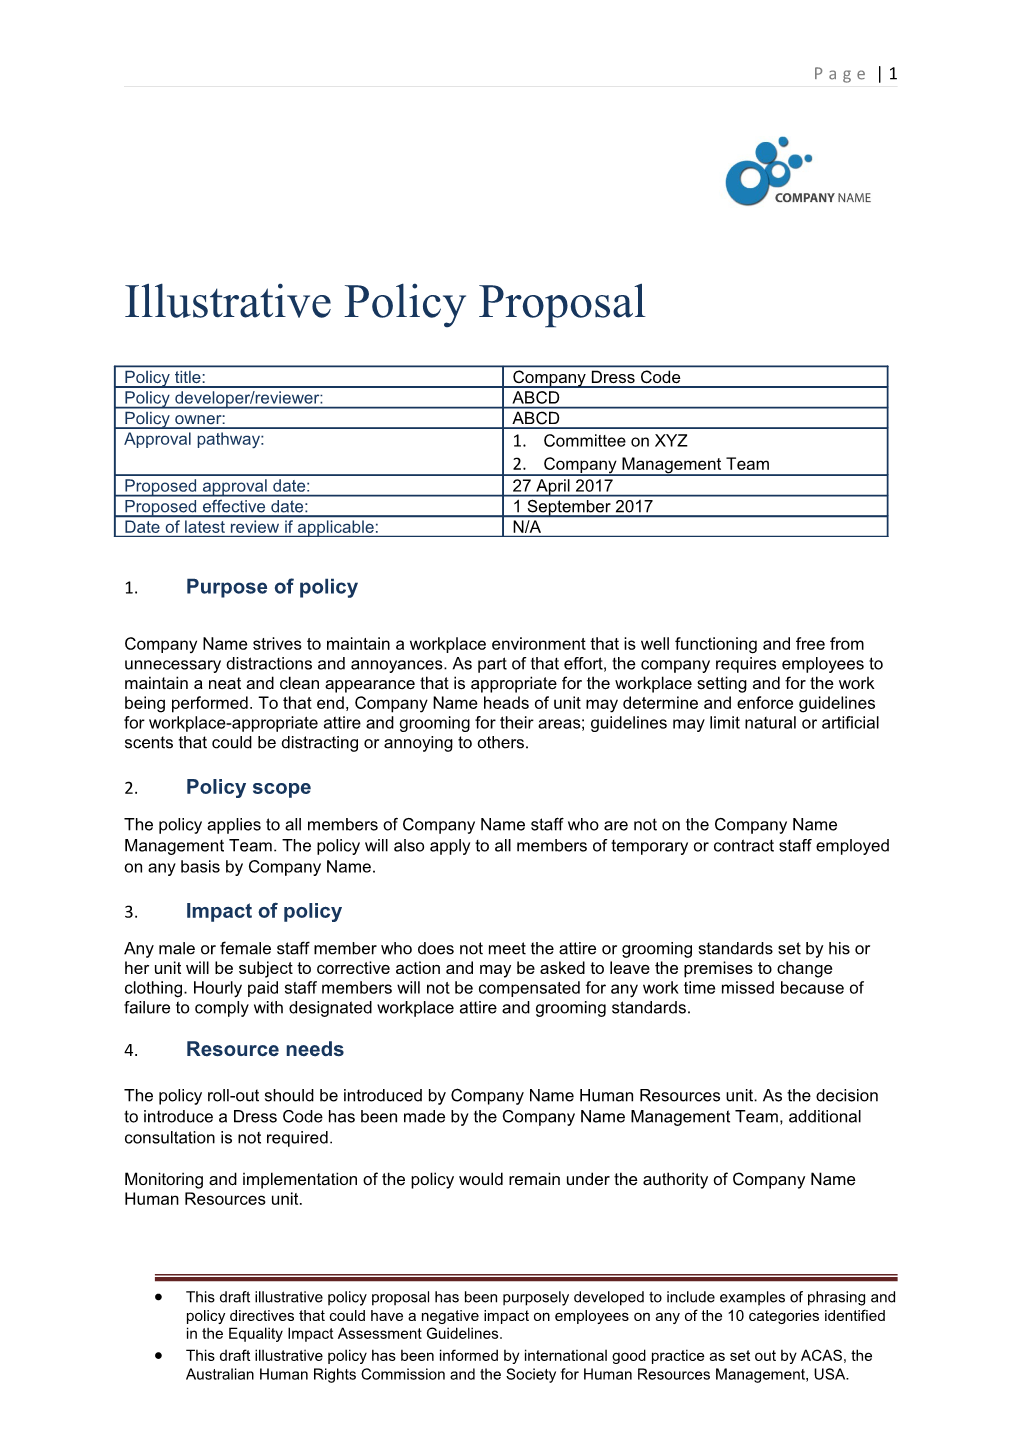 Illustrative Policy Proposal